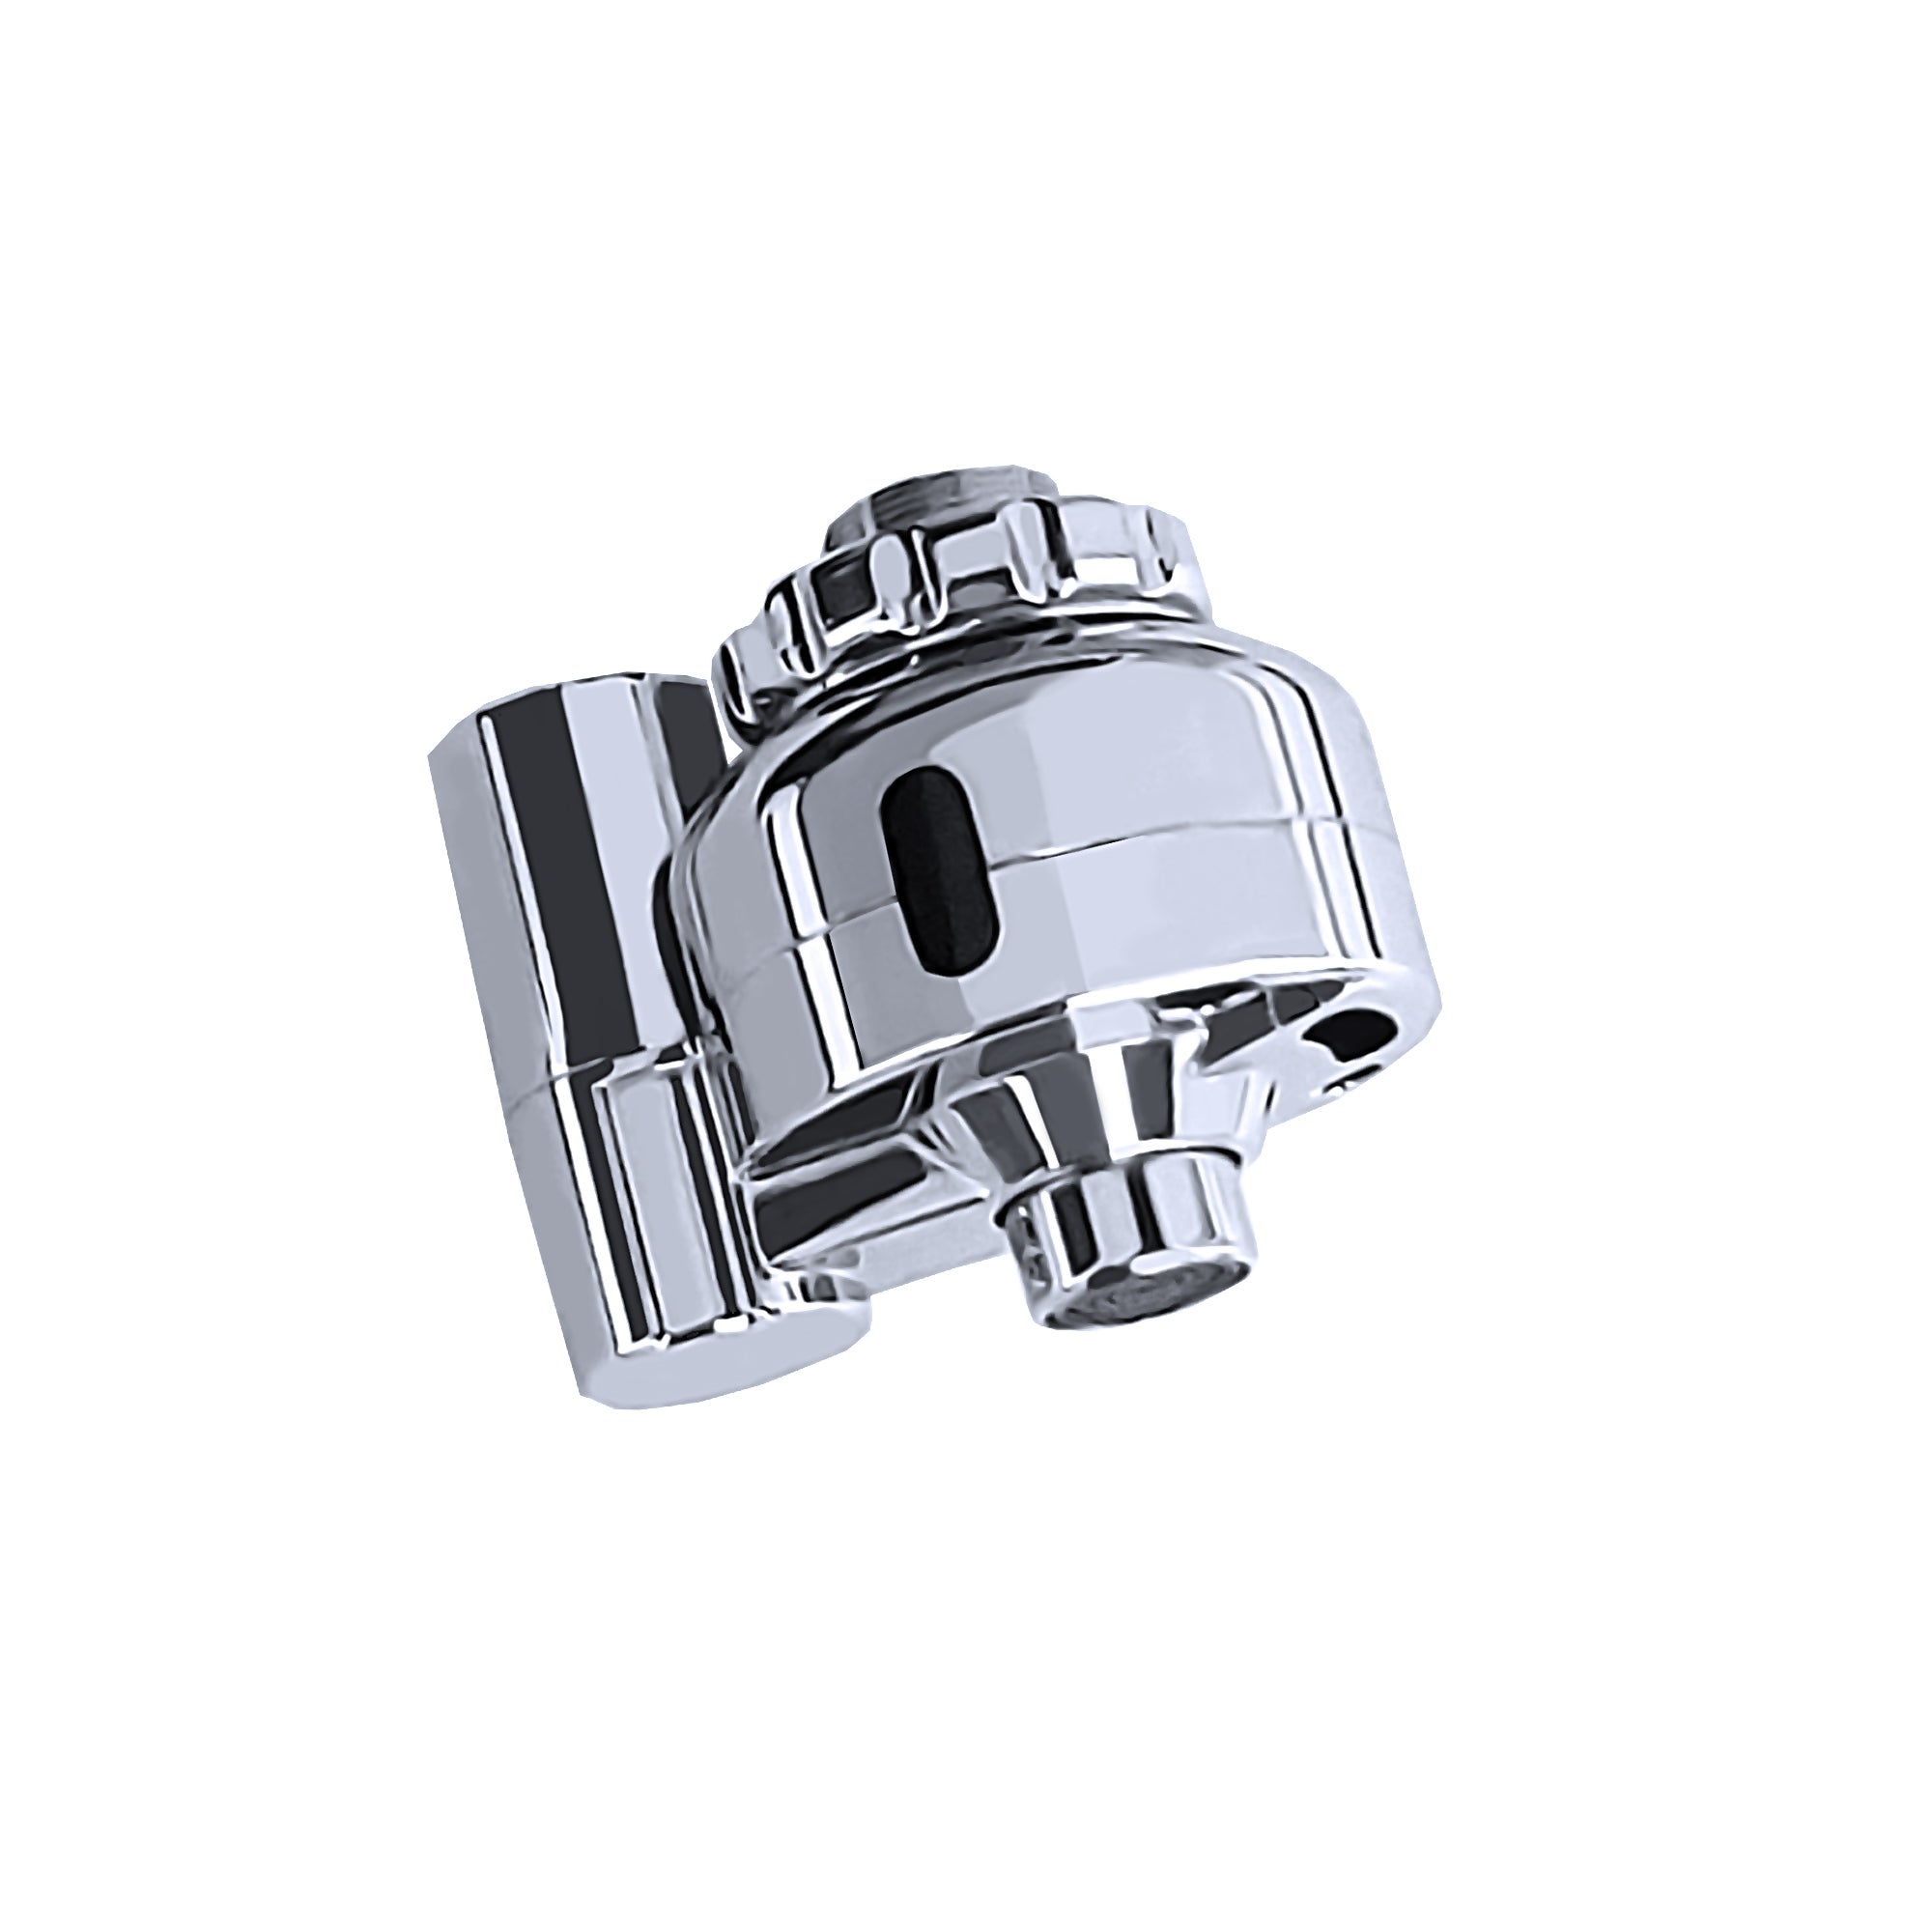 Whitehaus Collection's Eco-Friendly Touchless Polished Chrome Faucet Aerator with Smart Sensor WH-TA1301 - Vital Hydrotherapy